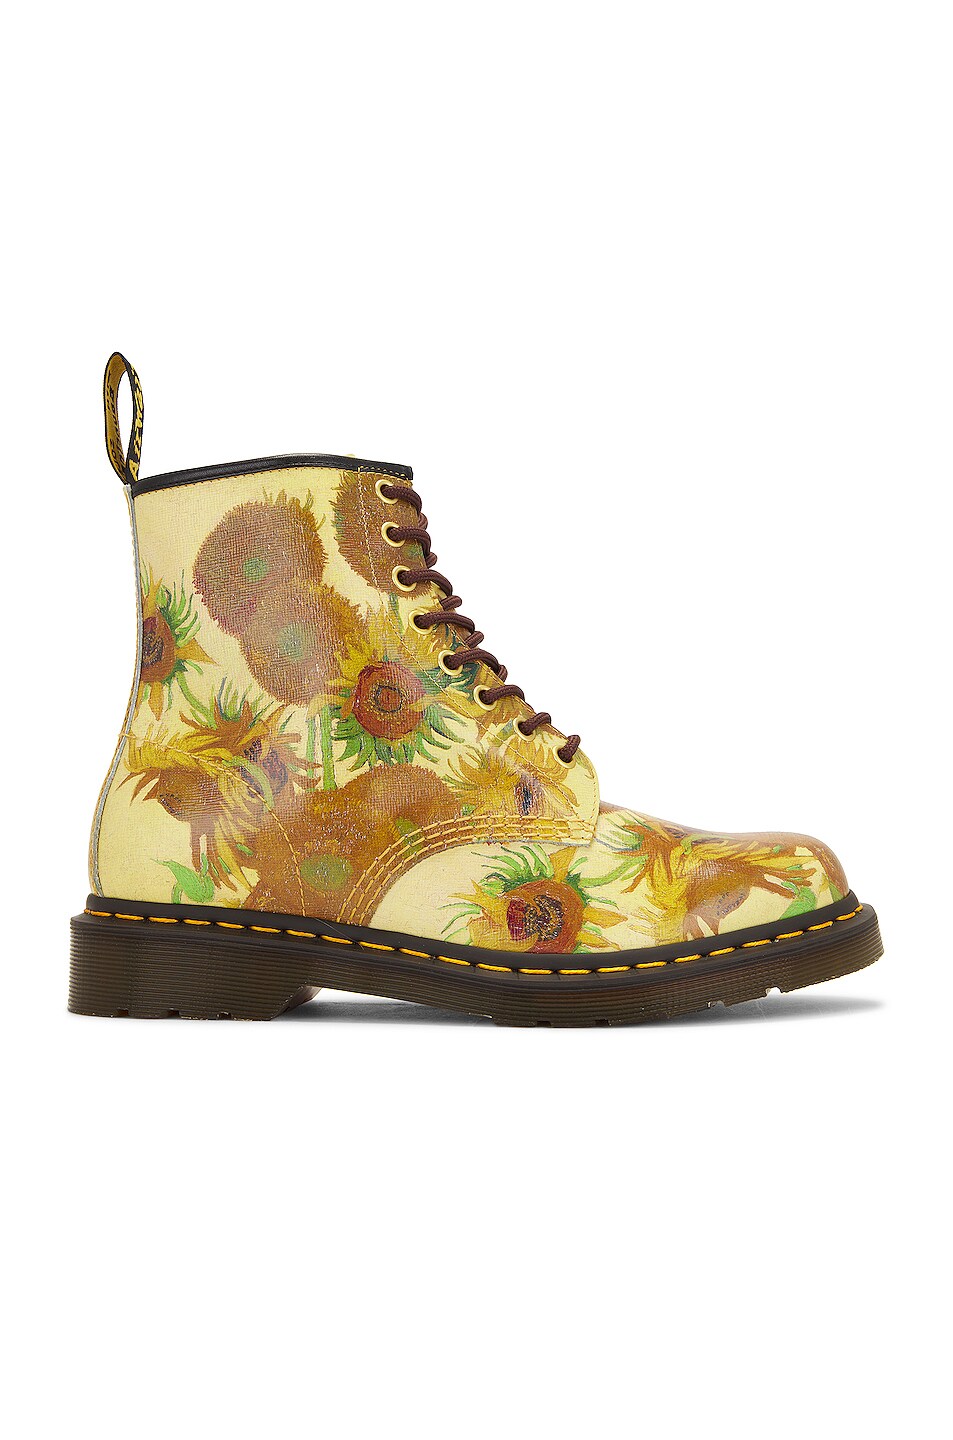 Image 1 of Dr. Martens x The National Gallery 1460 in Sunflowers